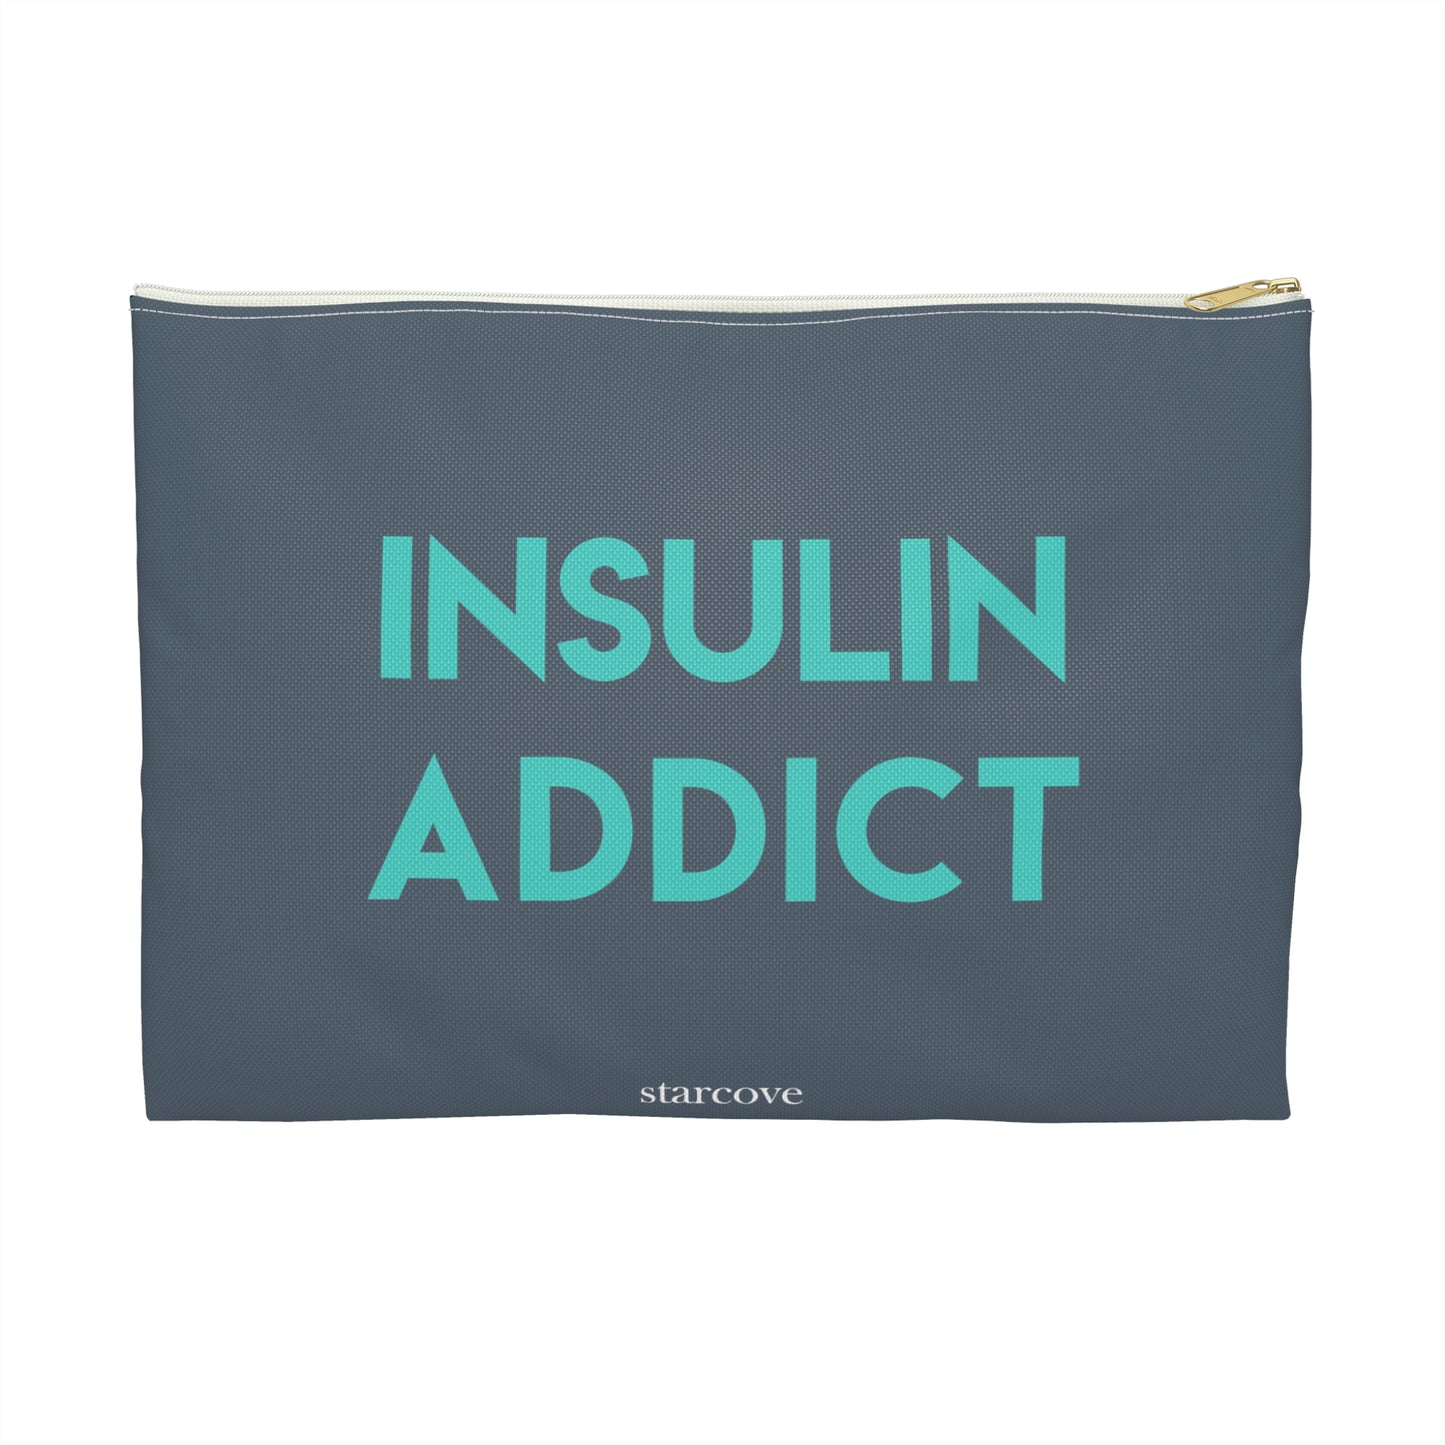 Insulin Addict Diabetes Bag, My Diabetic Supply Pouch Funny Case Type 1 2 One Accessory Zipper Travel Small Large Pouch Gift Starcove Fashion